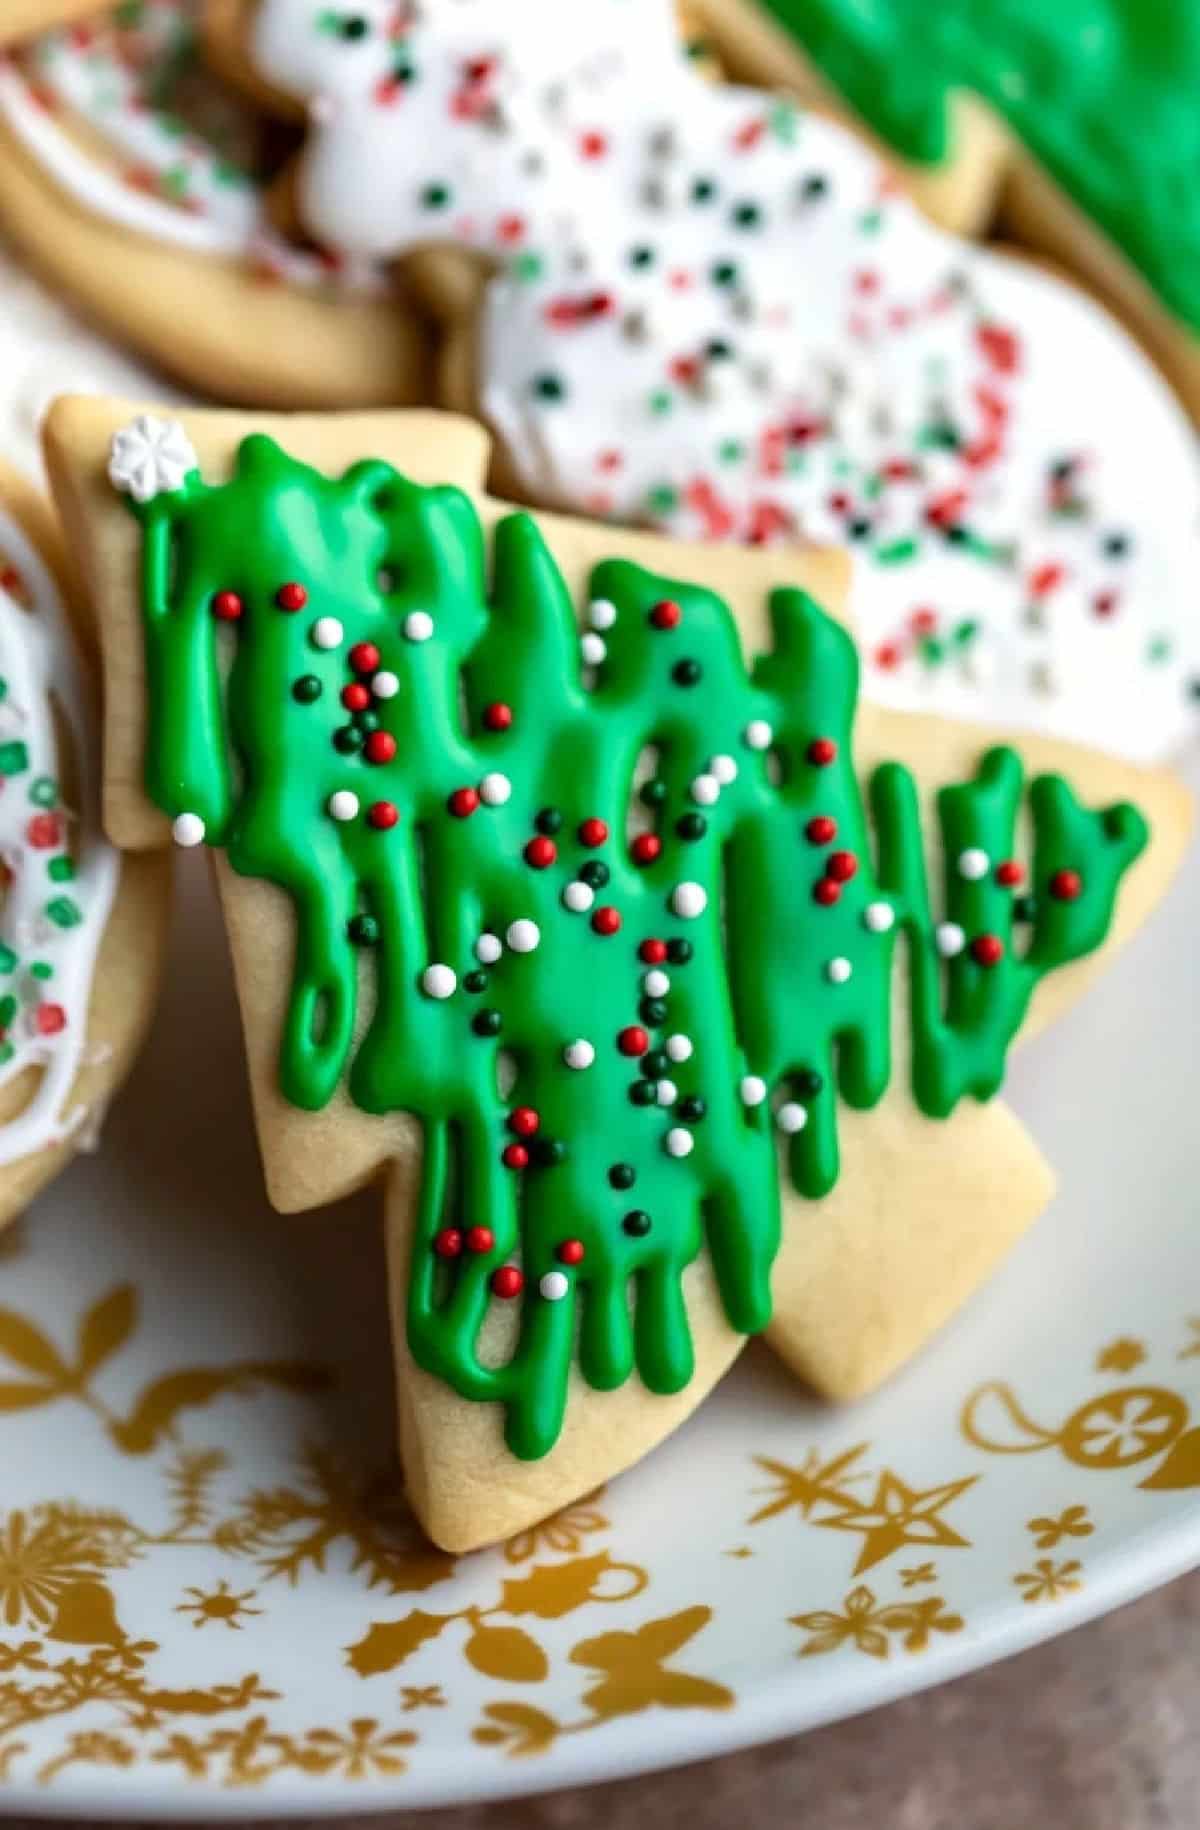 https://www.ihearteating.com/wp-content/uploads/2022/12/no-chill-sugar-cookies-17-800-1200.jpg